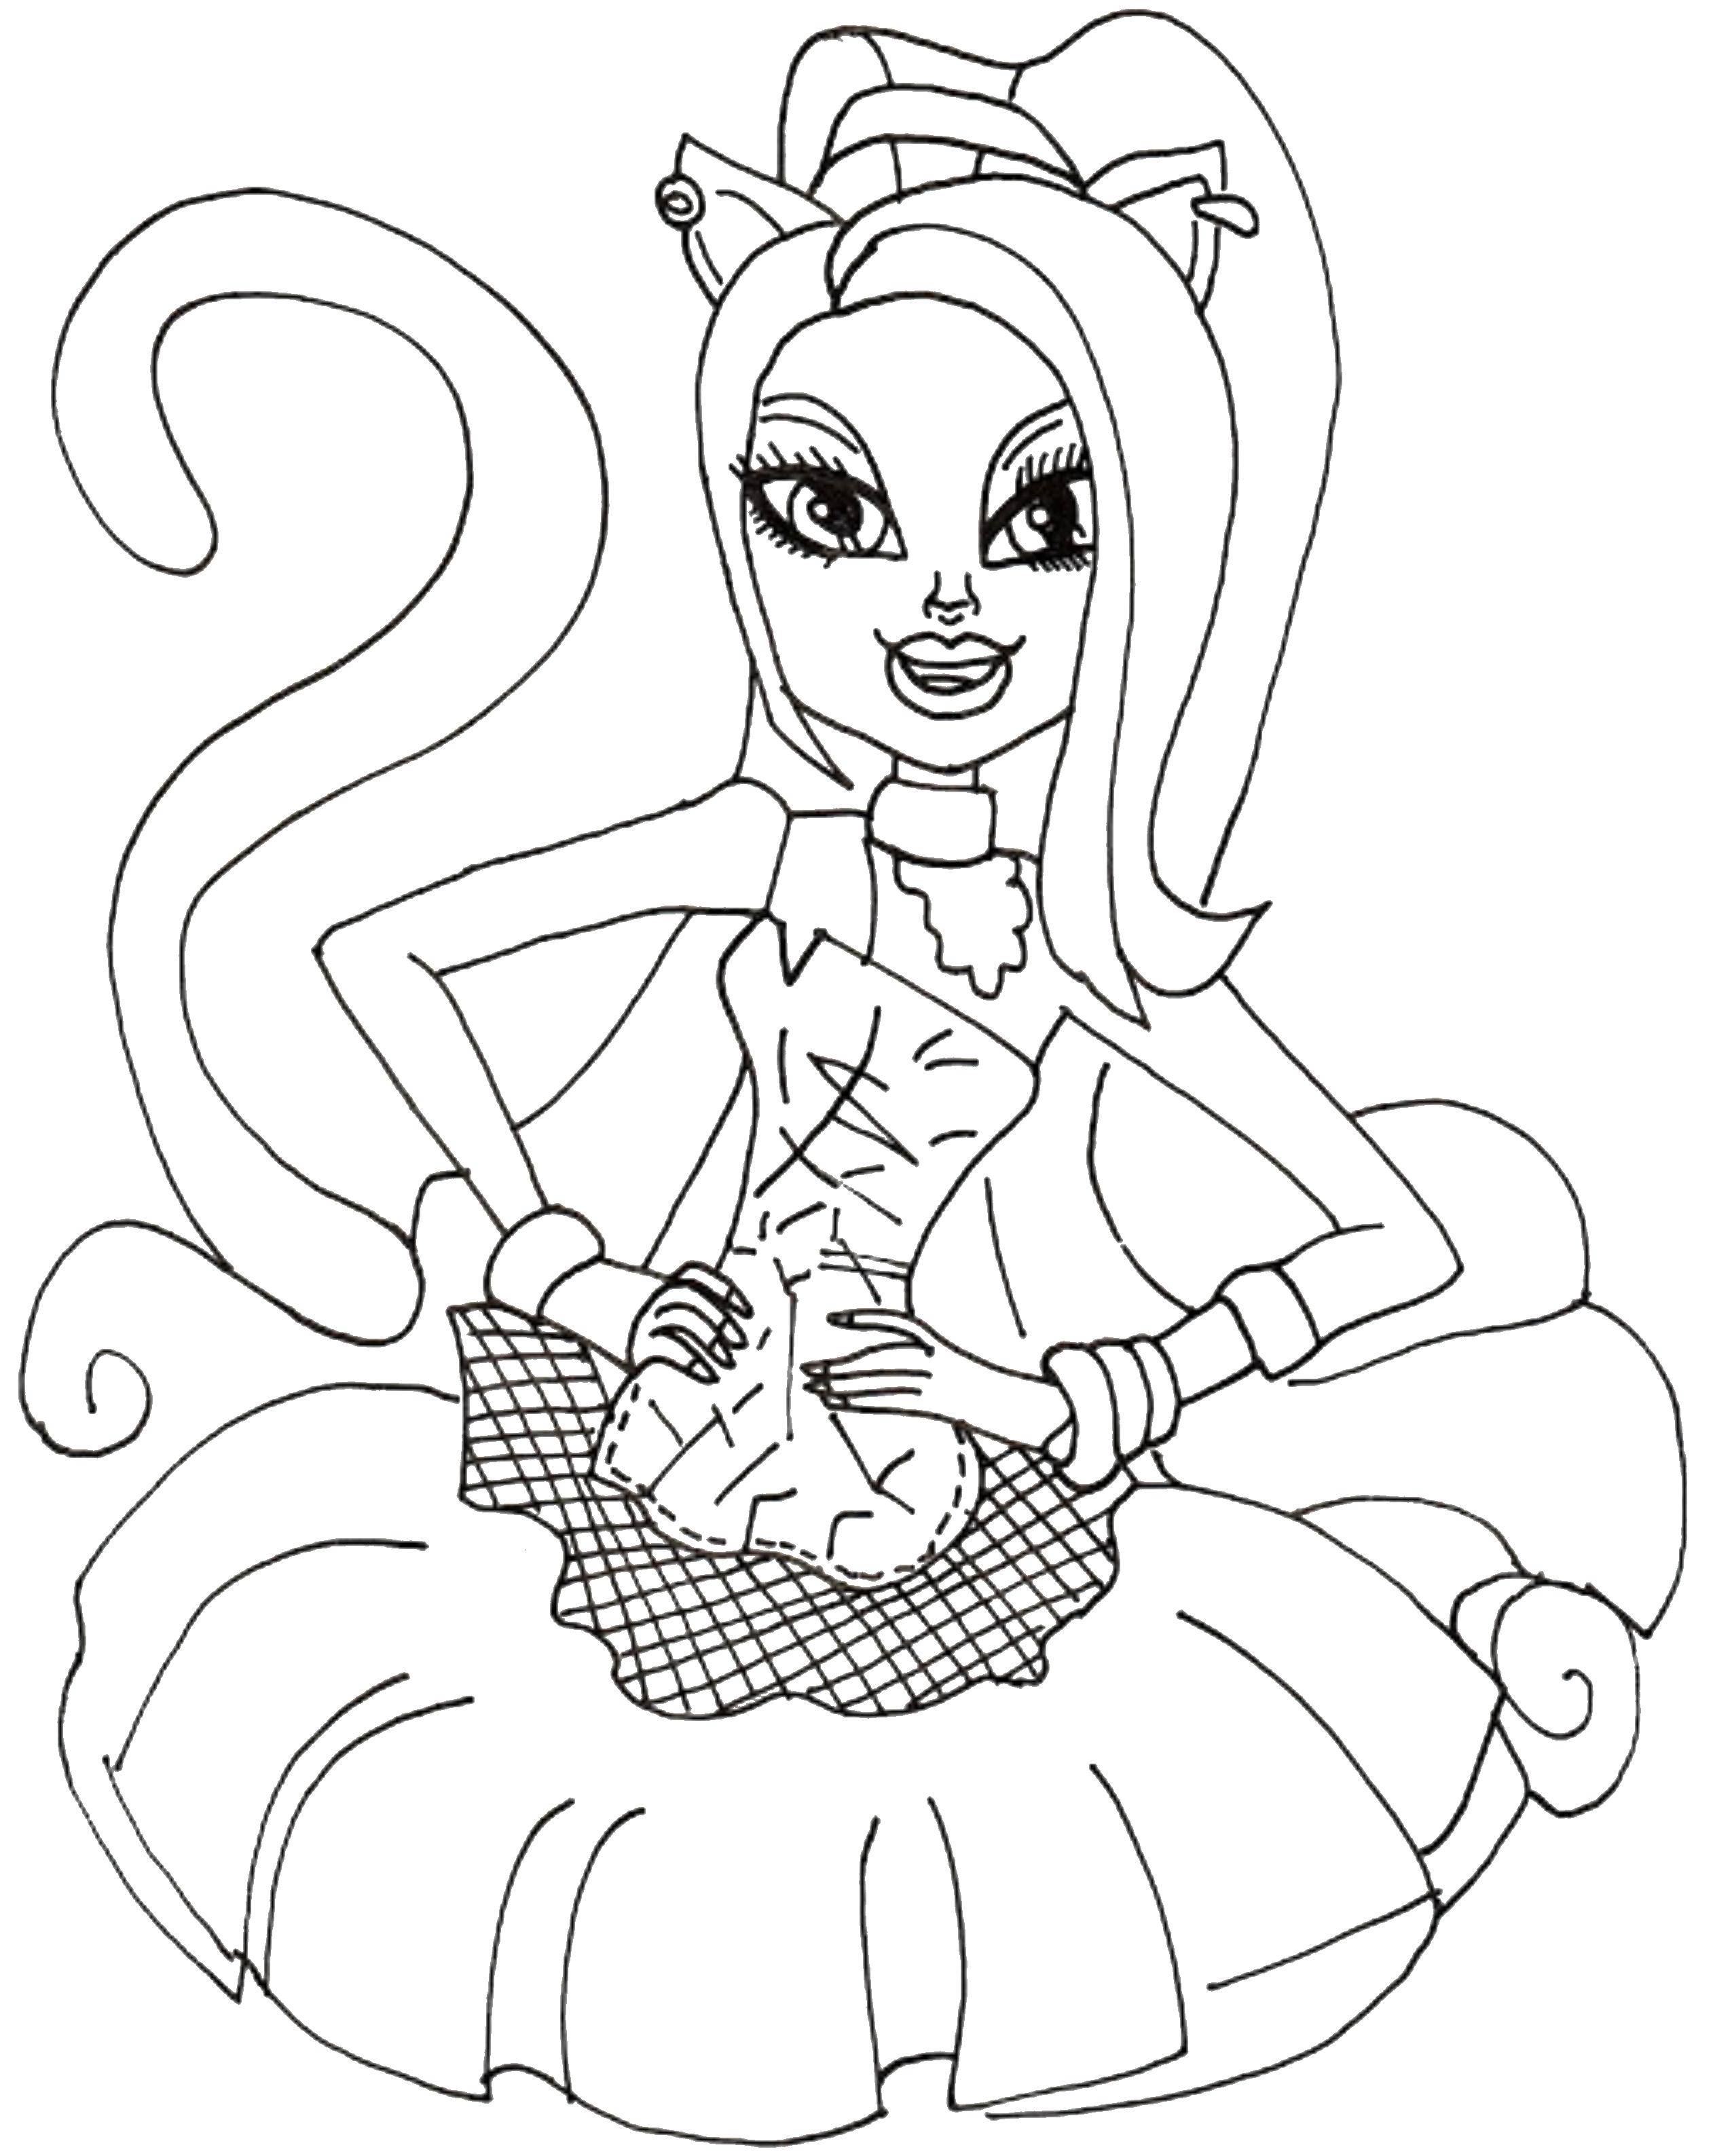 Coloring Monster high. Category Monster high. Tags:  monster high, freak fusion.